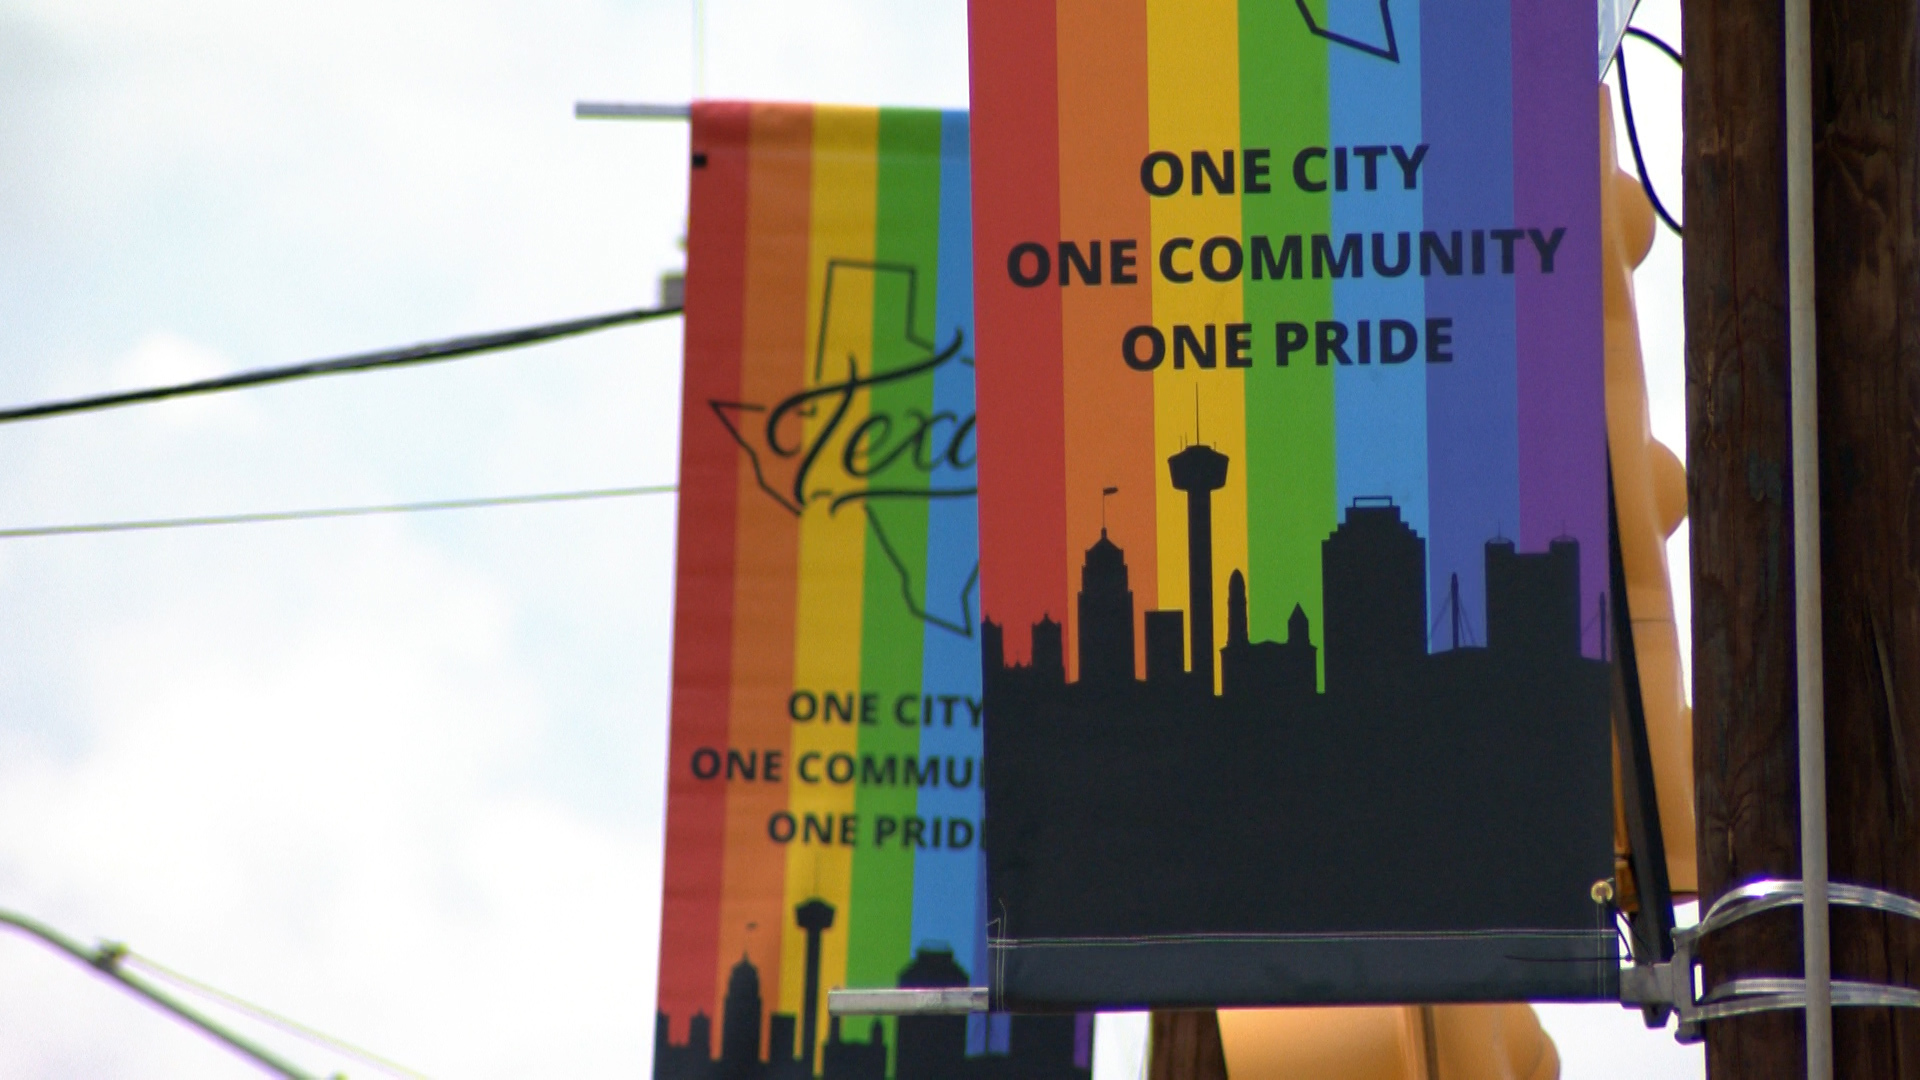 This follows more than 10 years of advocacy by Pride SA to recognize the cultural significance of the neighborhood off North Main between Ashby and Euclid.